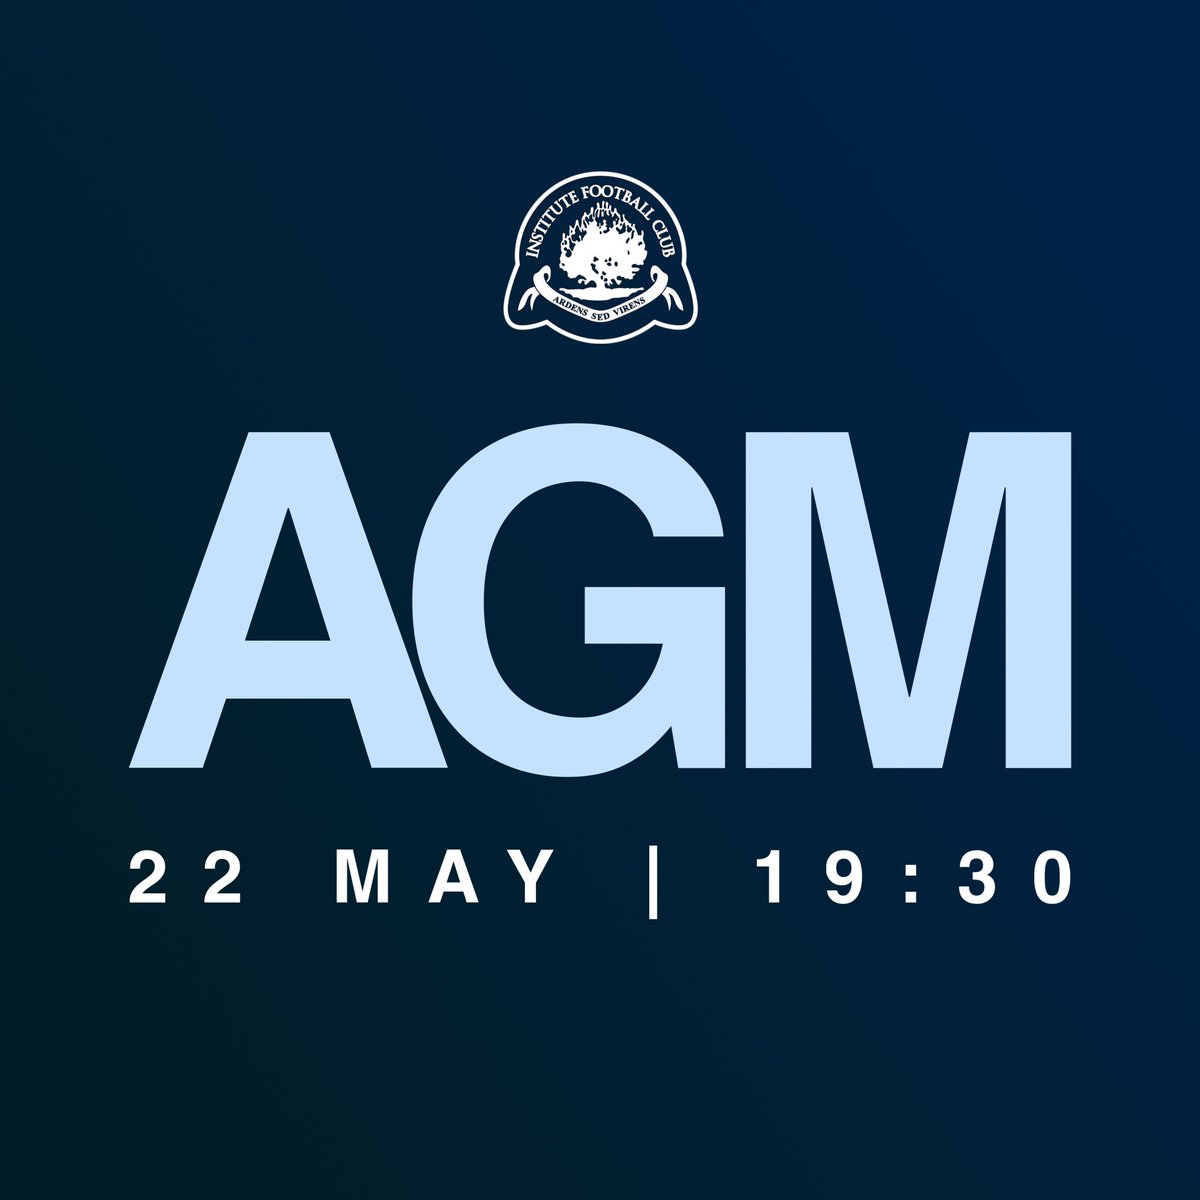 Our AGM will be held upstairs in Brigade CC on Wednesday 22nd May, 7.30pm. Everyone welcome. #stute